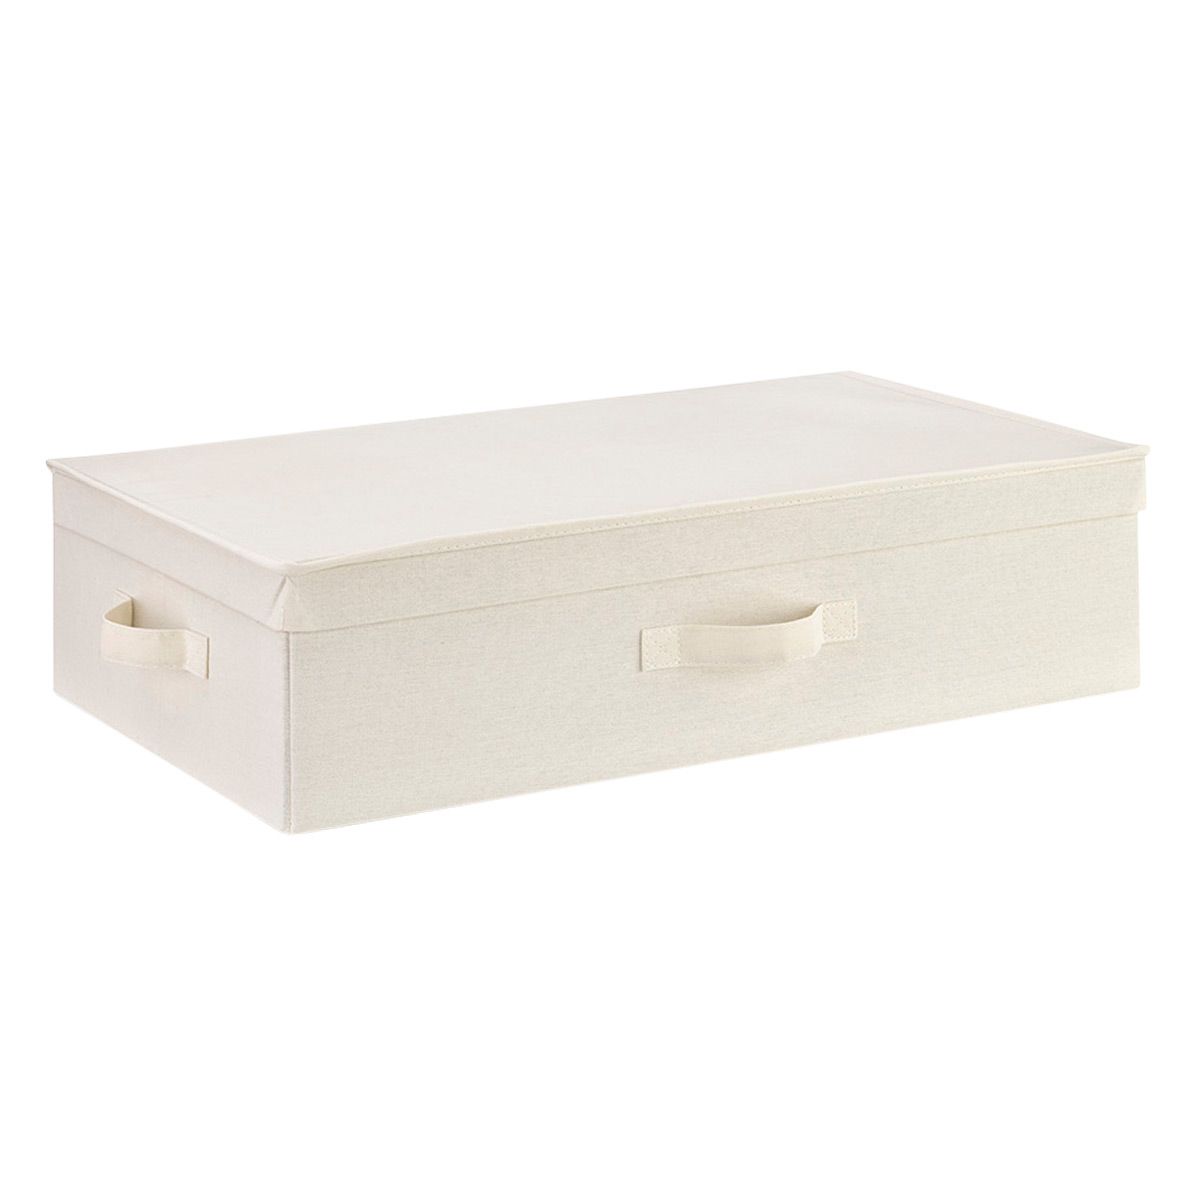 Fabric Under Bed Box | The Container Store